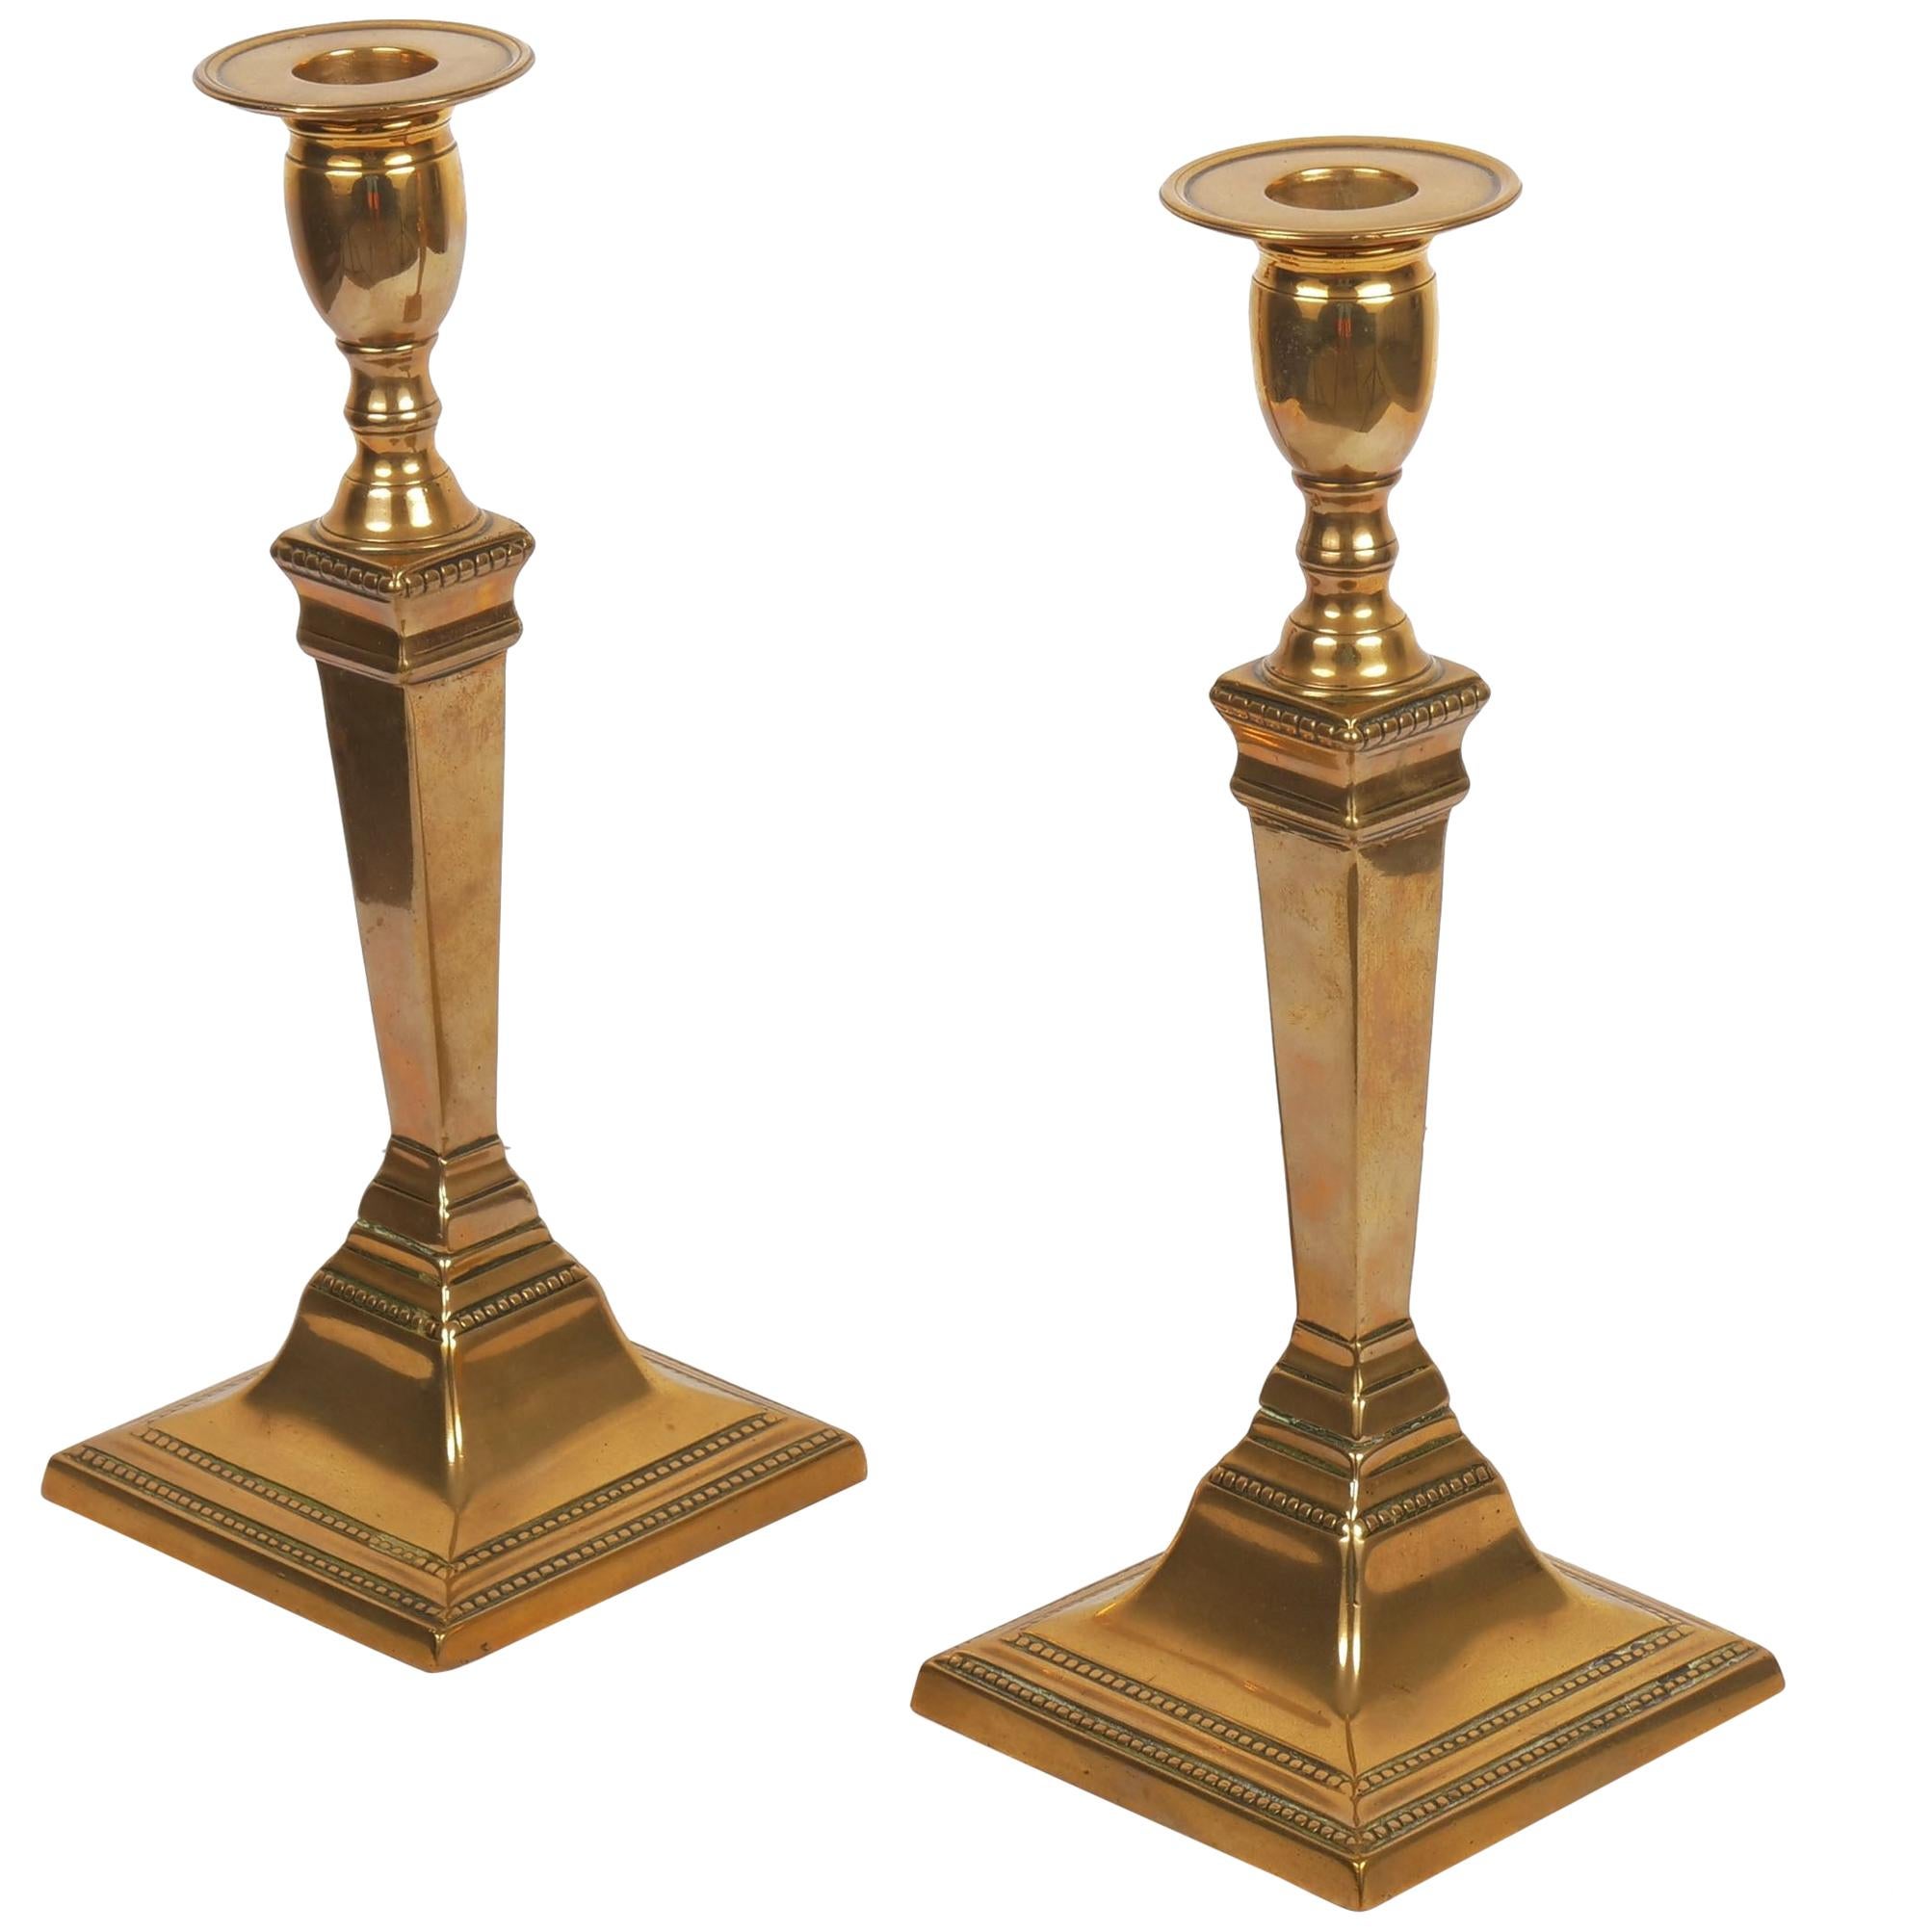 Pair of English Neoclassical Antique Brass Candlesticks, circa 18th-19th Century